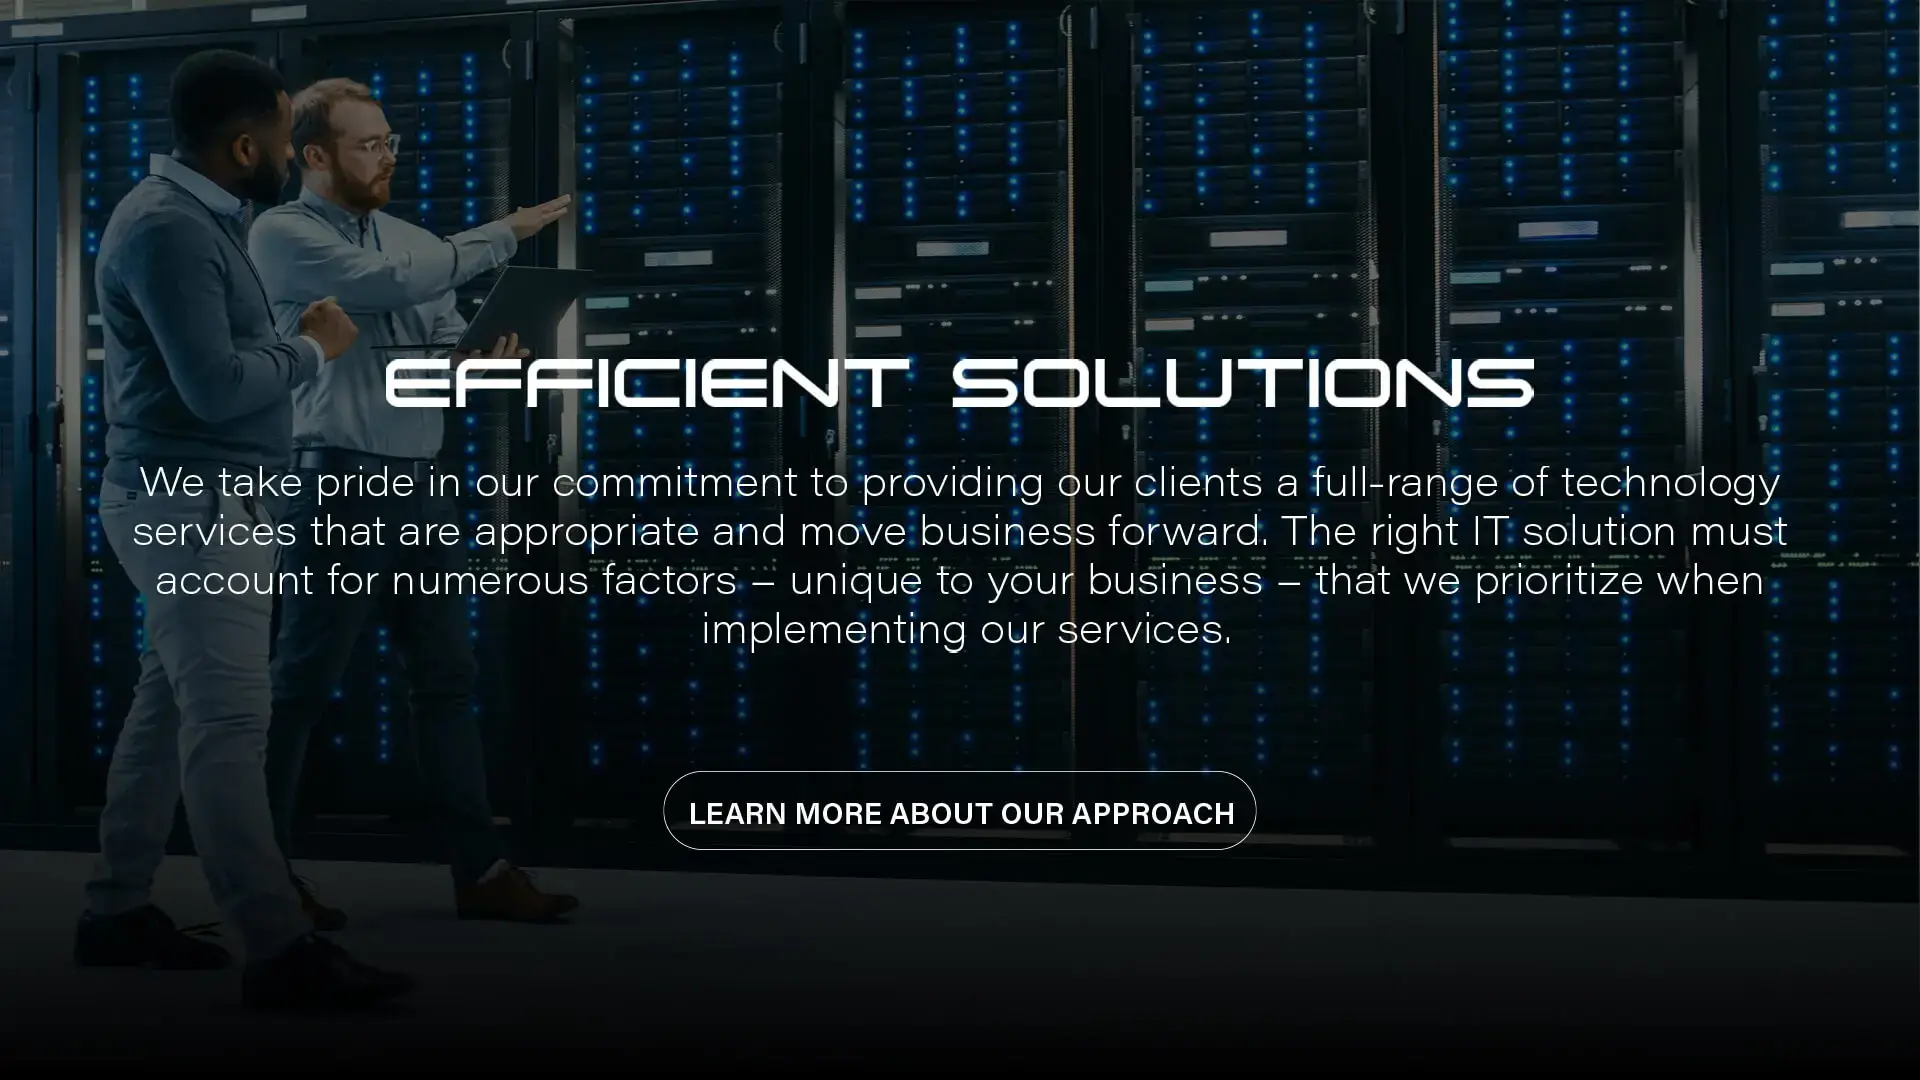 Efficient Solutions | We take pride in our commitment to providing our clients a full-range of technology services that are appropriate and move business forward. The right IT solutions must account for numerous factors - unique to your business - that we prioritize when implementing our services.